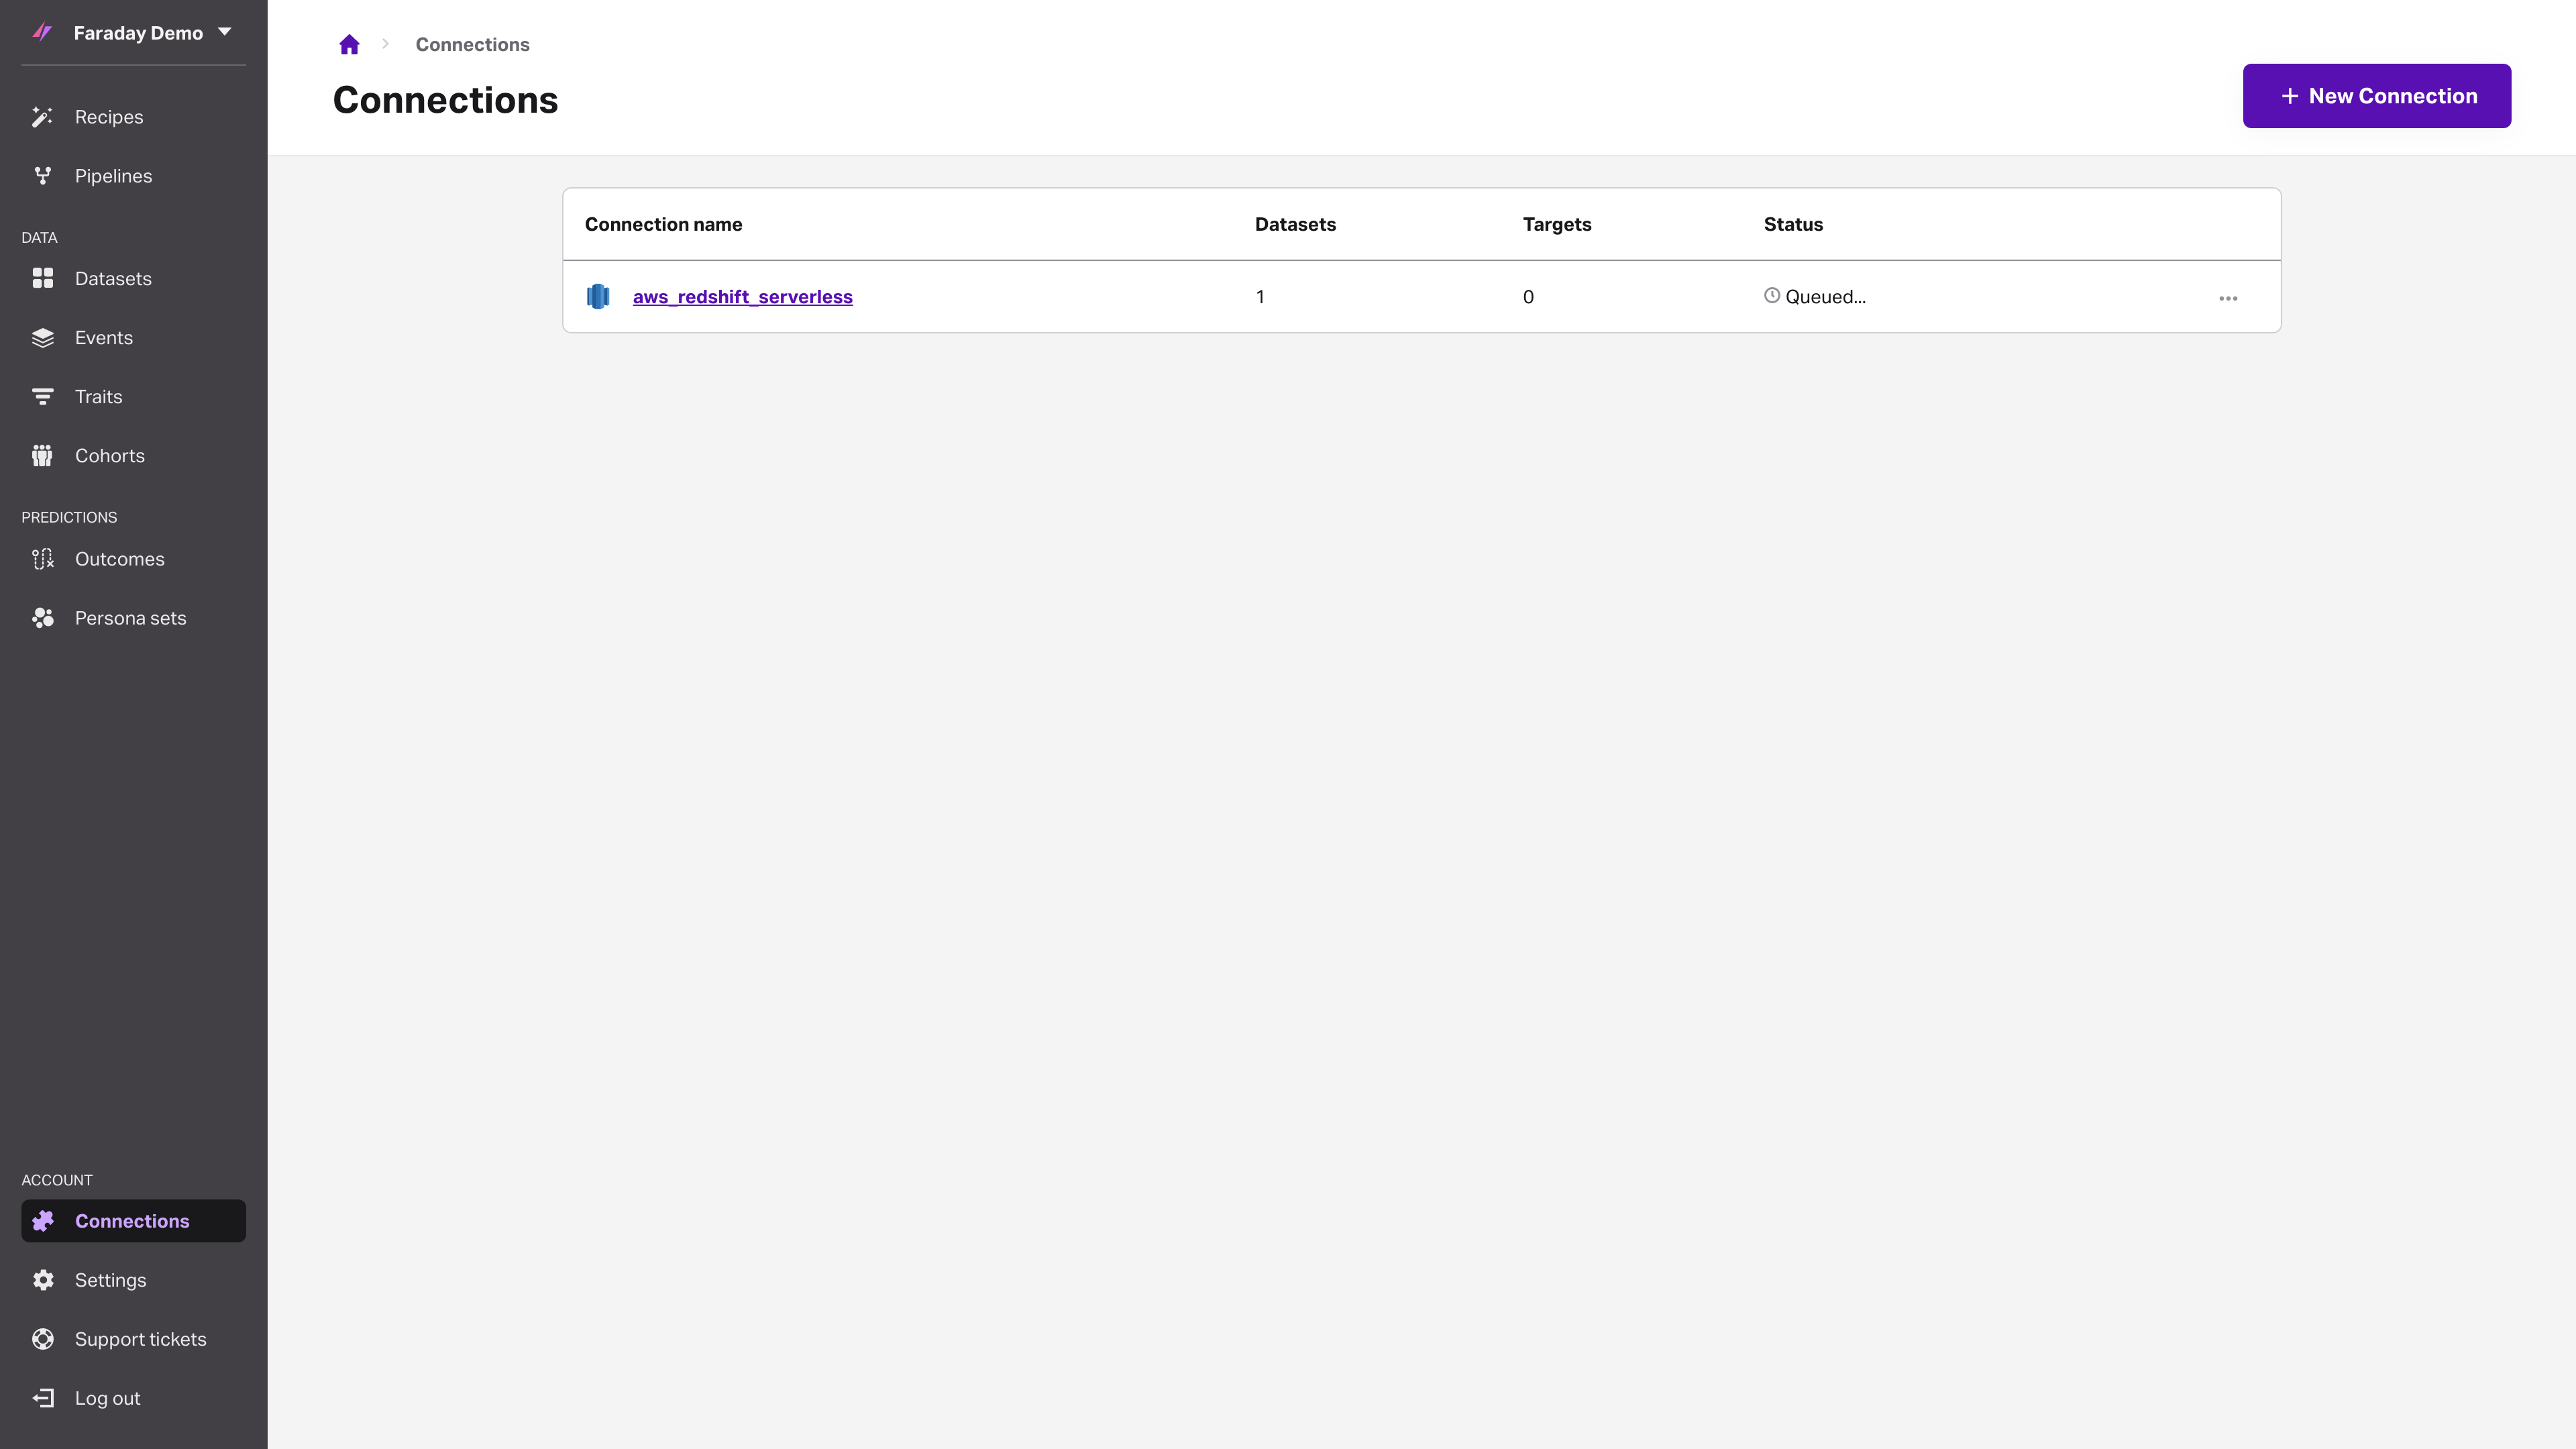 Screenshot of the connections listing that includes Redshift Serverless